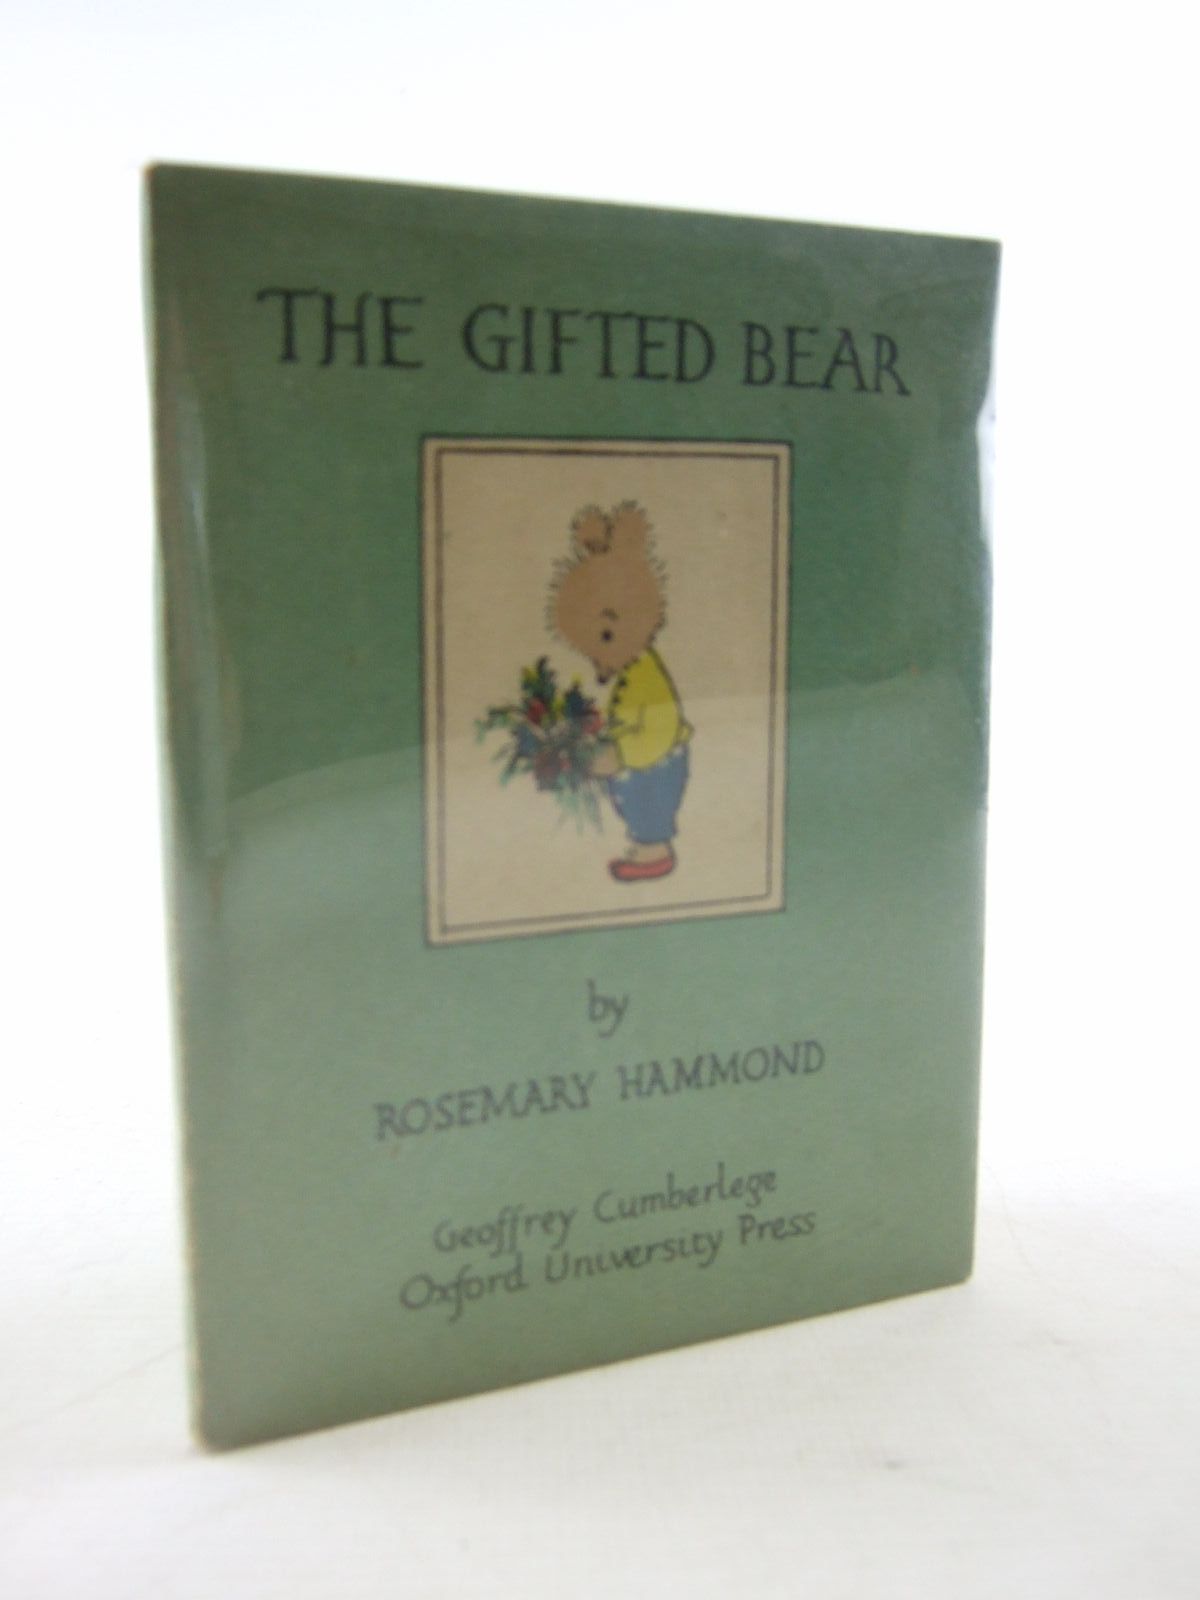 Photo of THE GIFTED BEAR written by Hammond, Rosemary illustrated by Hammond, Rosemary published by Geoffrey Cumberlege, Oxford University Press (STOCK CODE: 1706677)  for sale by Stella & Rose's Books